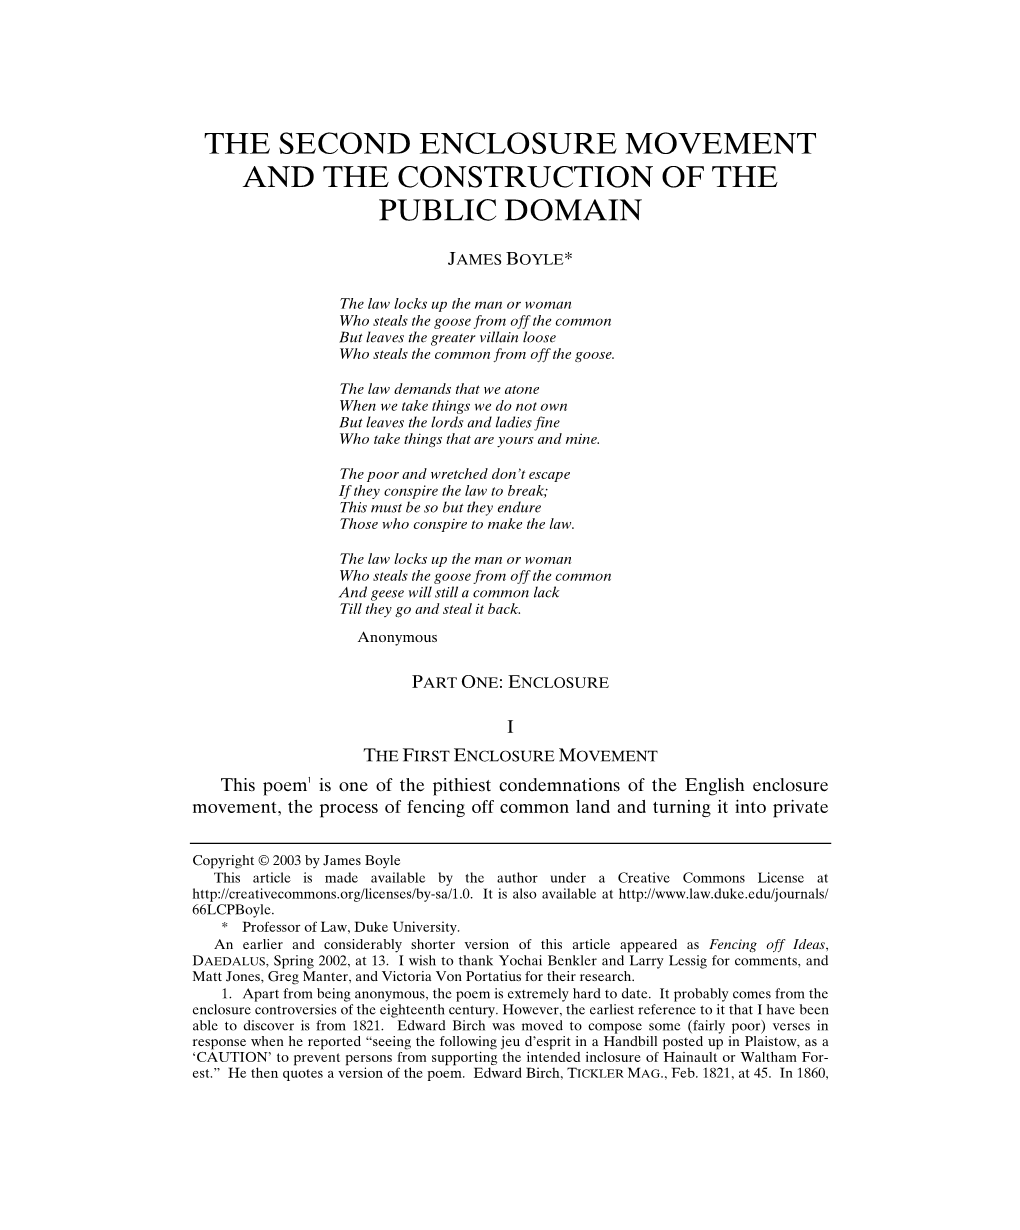 The Second Enclosure Movement and the Construction of the Public Domain